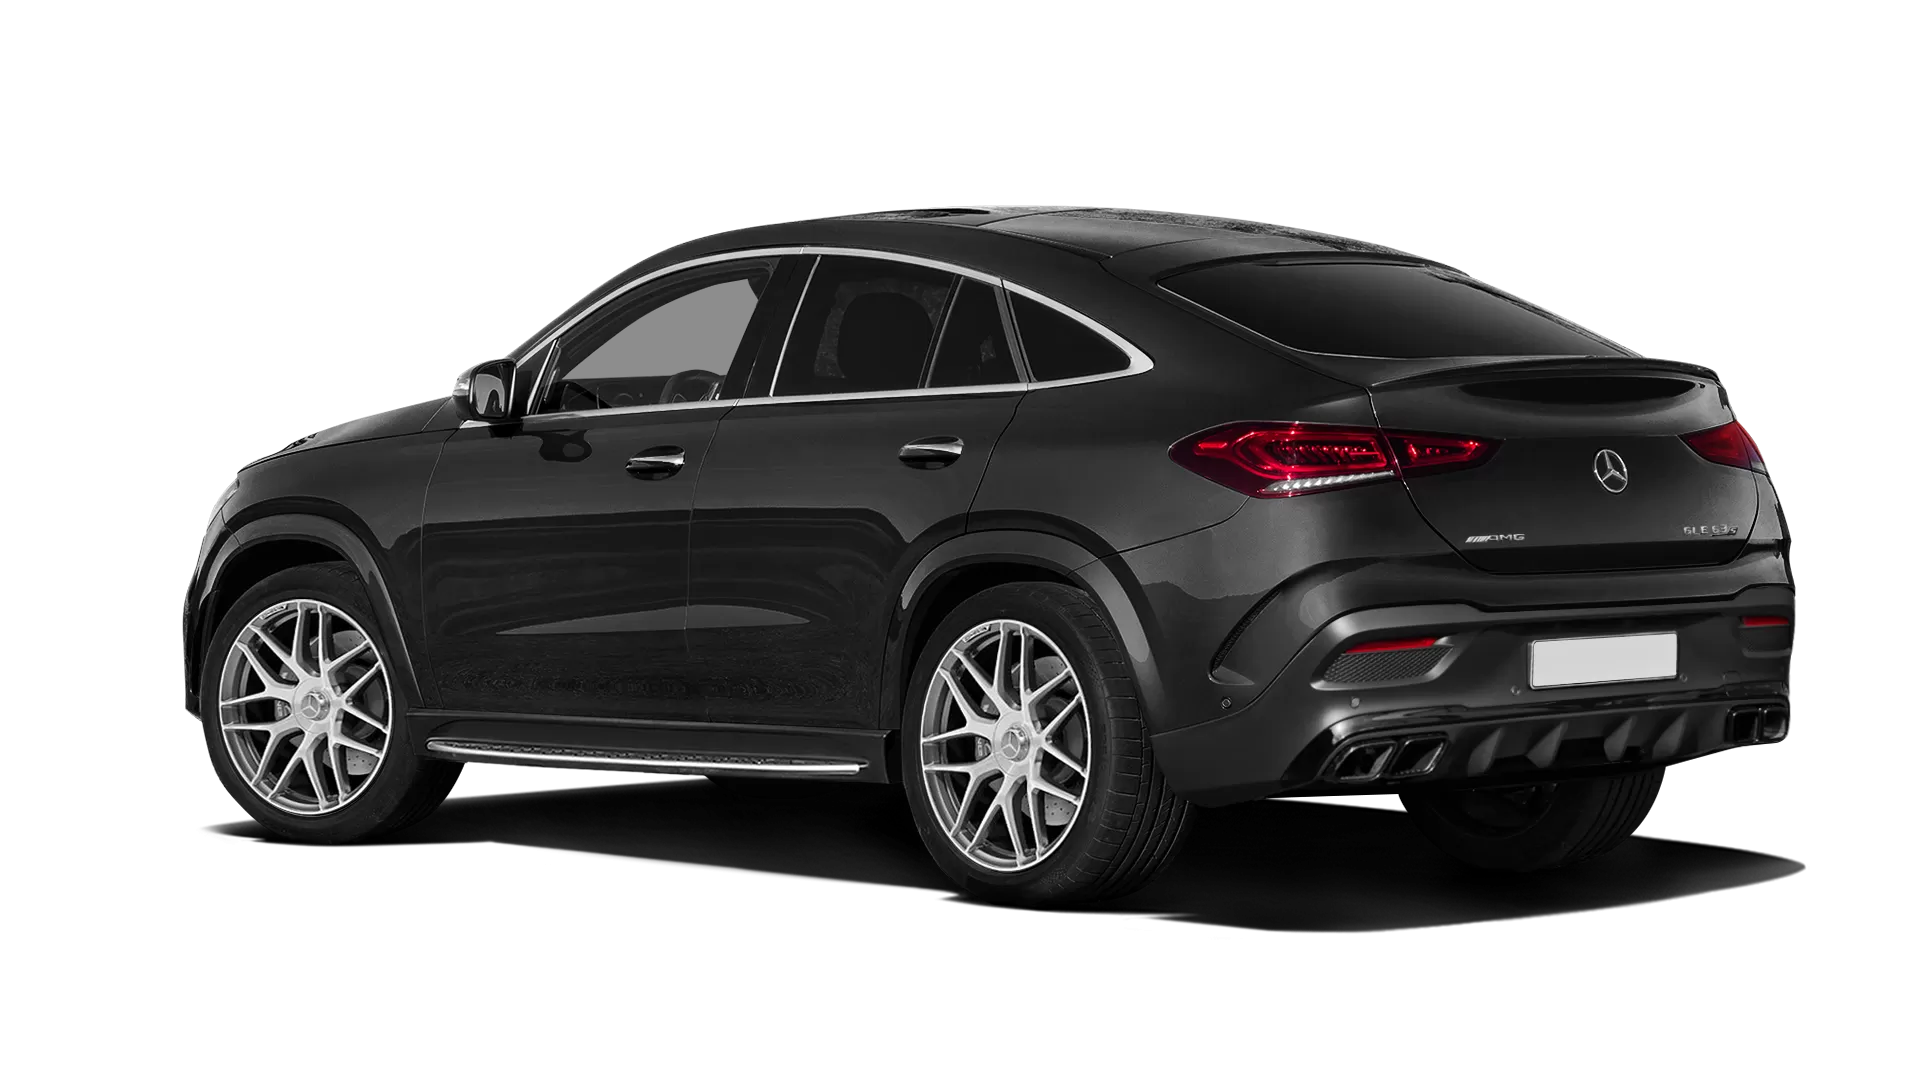 Mercedes GLE Coupe AMG 63 C167 stock rear view in Black Non-Metallic color